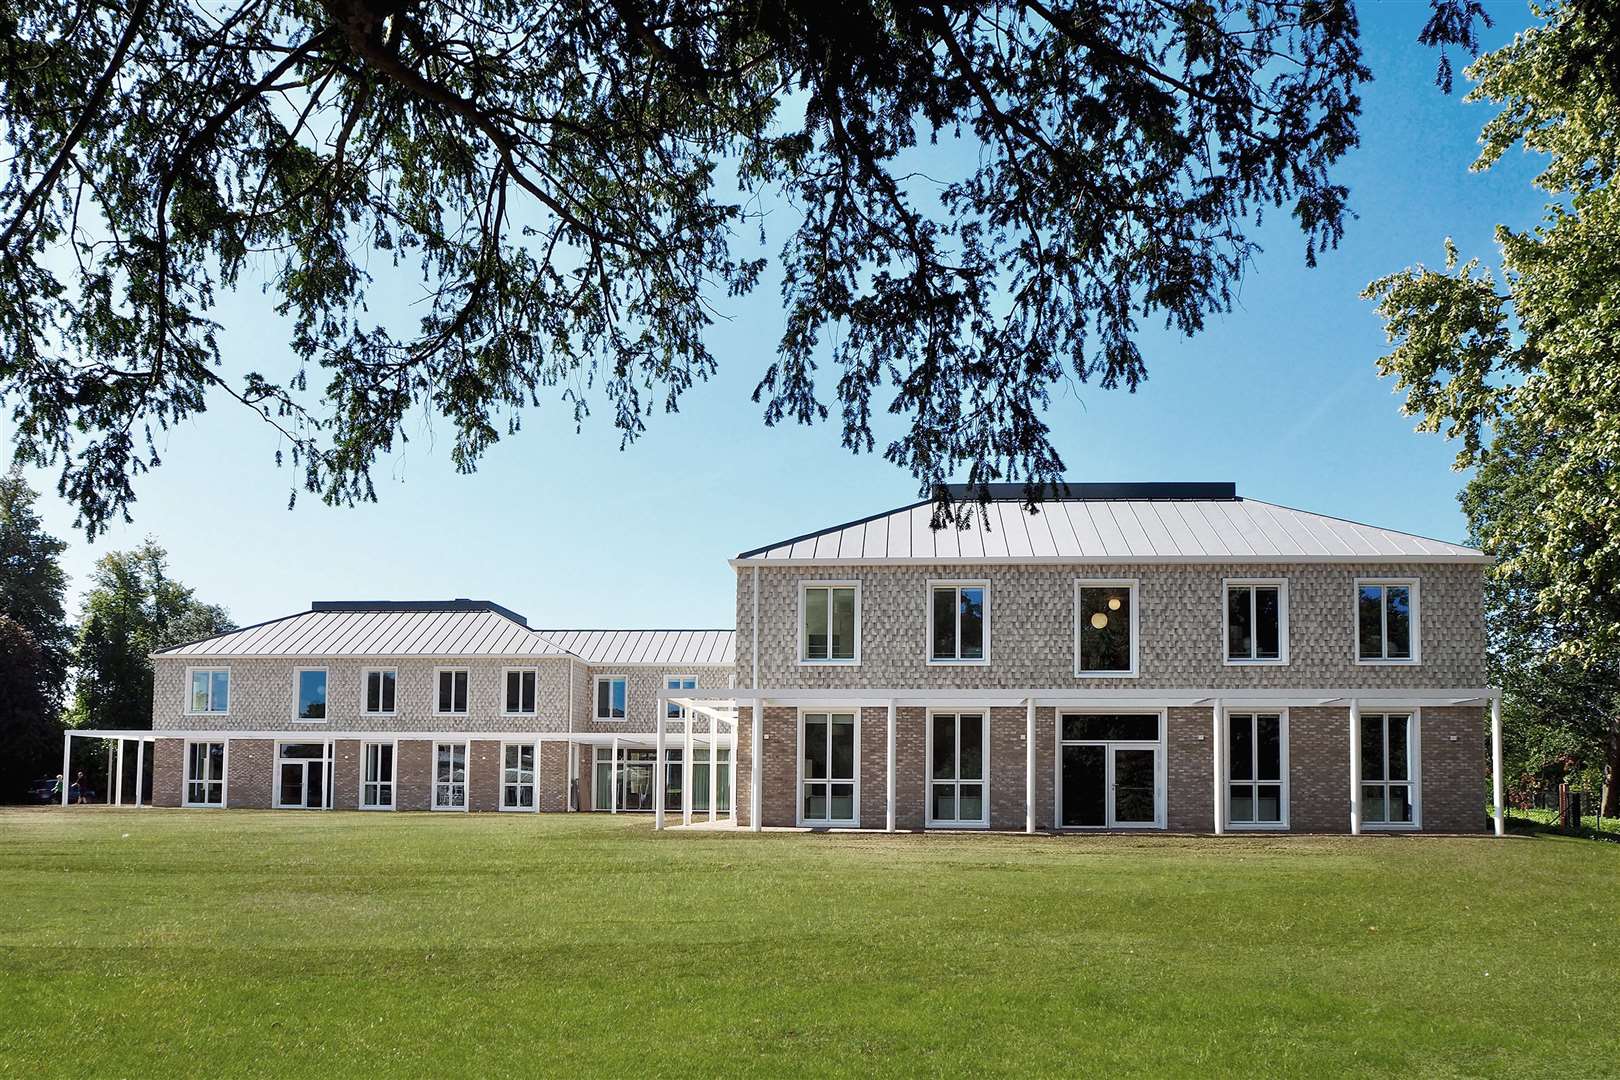 Aisher House at Sevenoaks School, designed by Ronalds Architects